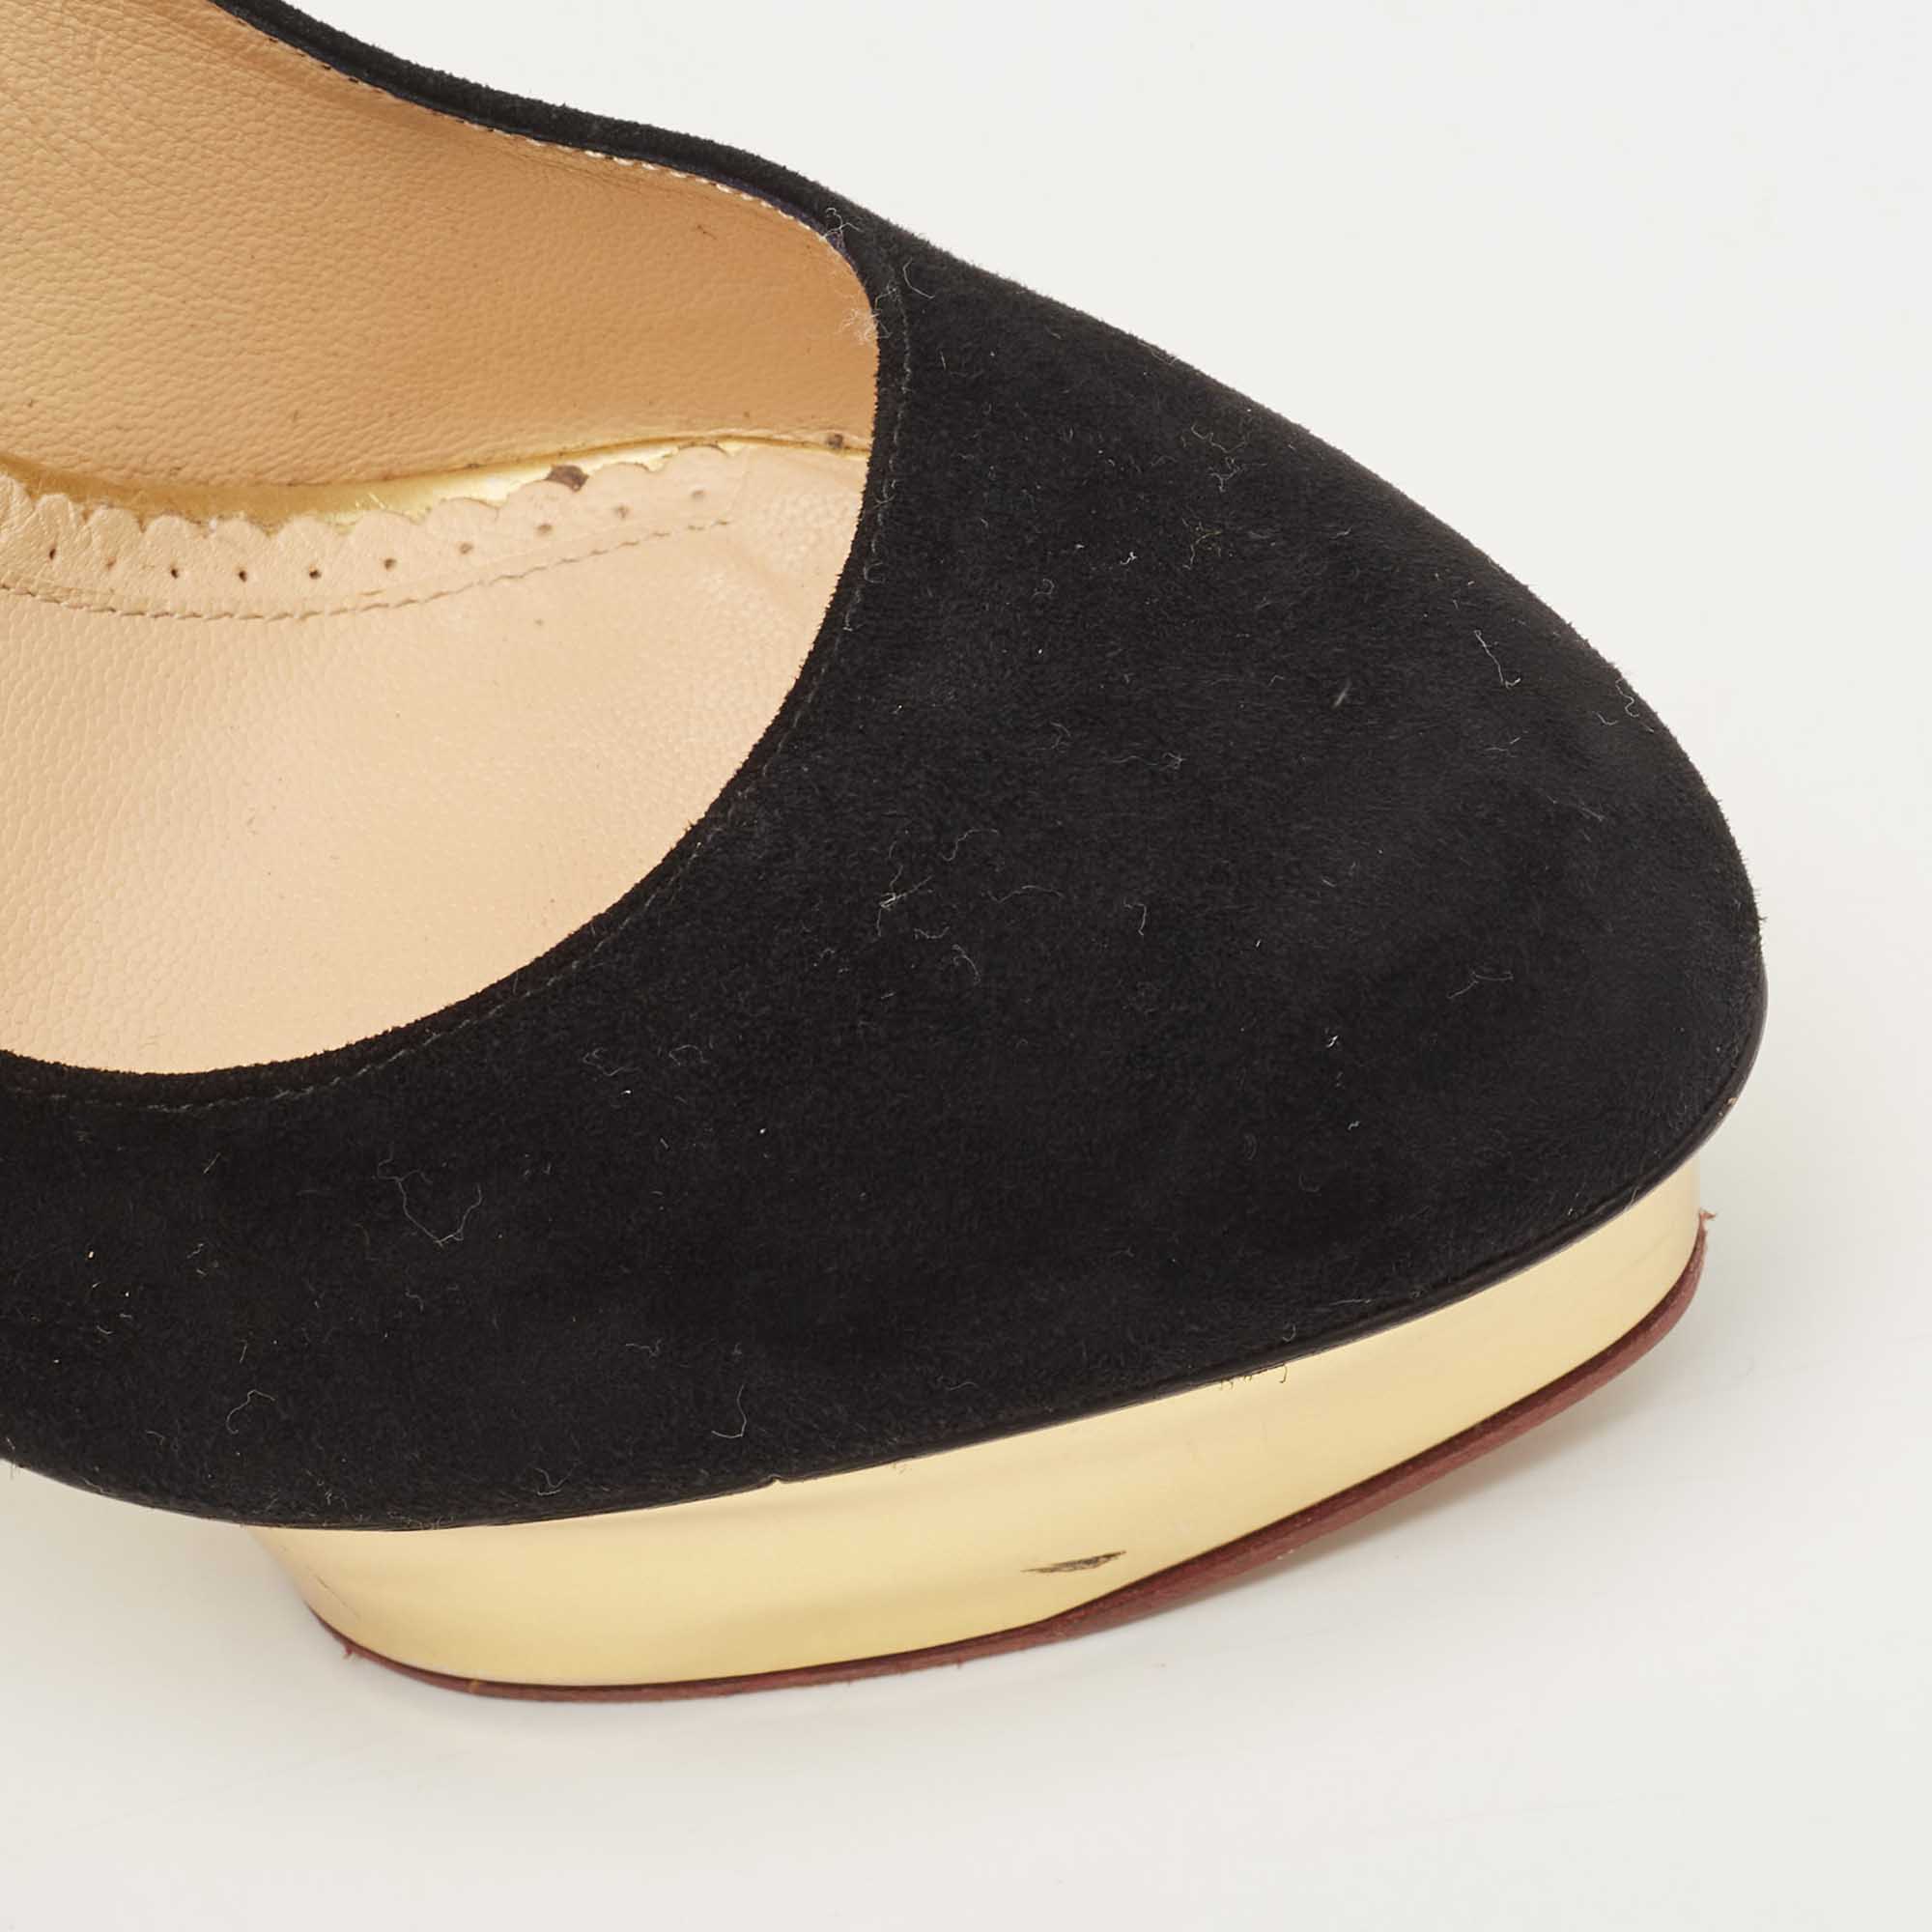 Charlotte Olympia Black Suede Dolly Pumps Size 39